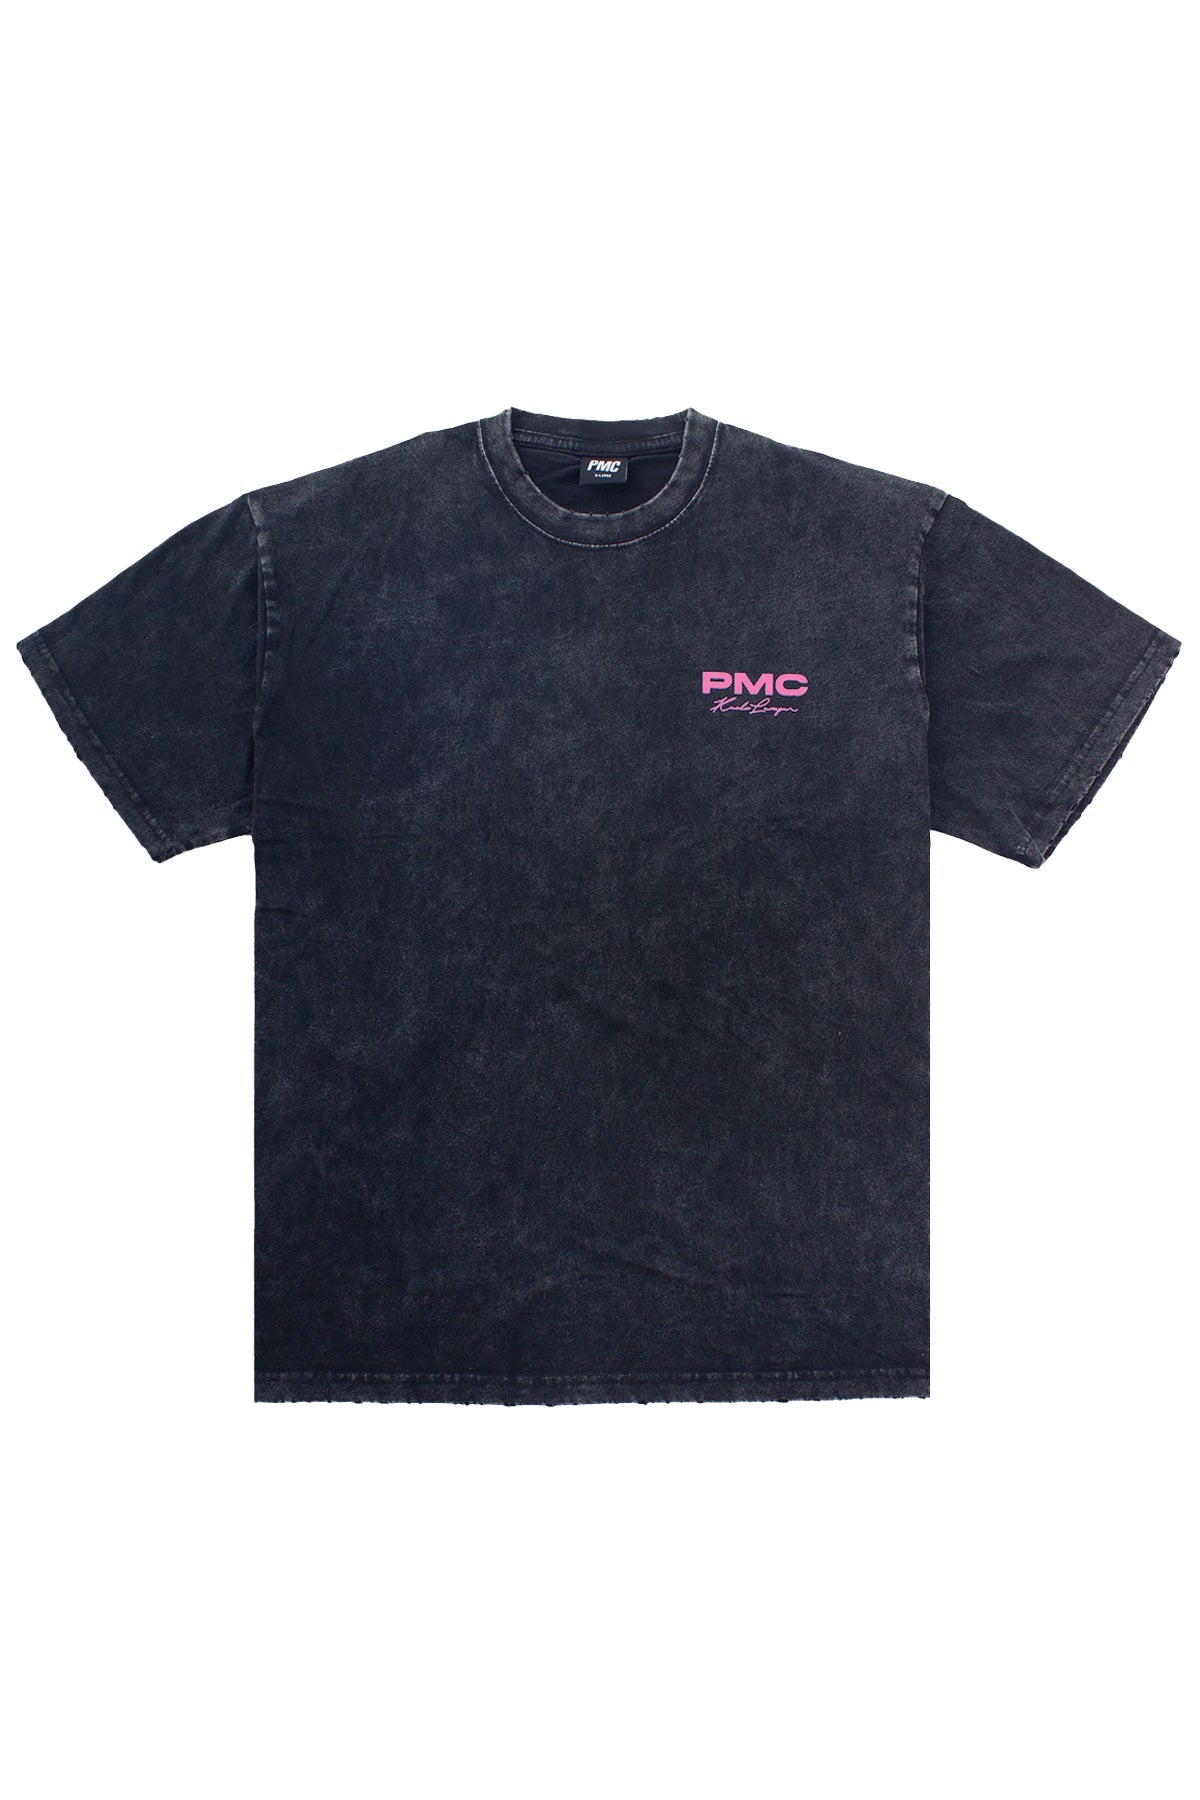 KL Script Stone Washed Tee - Archive